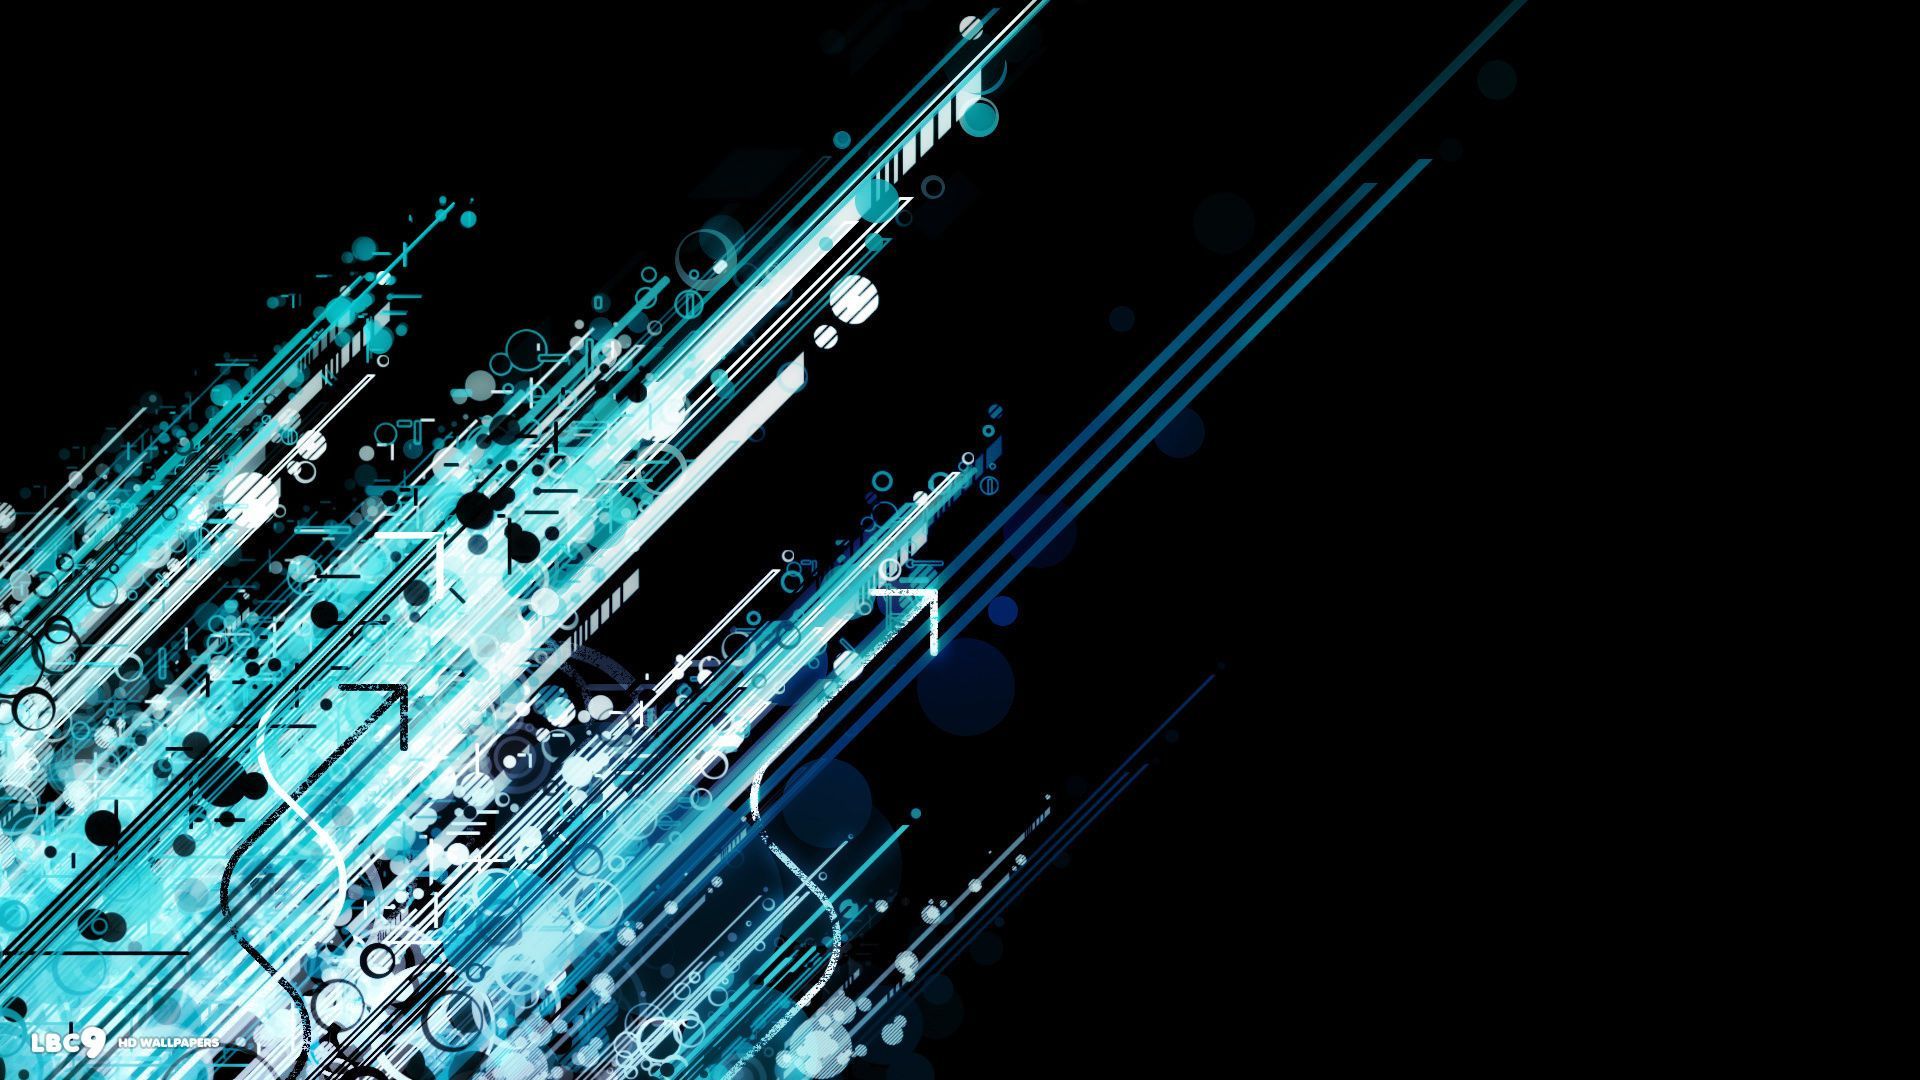 Abstract wallpaper 19 / 21 vector hd backgrounds